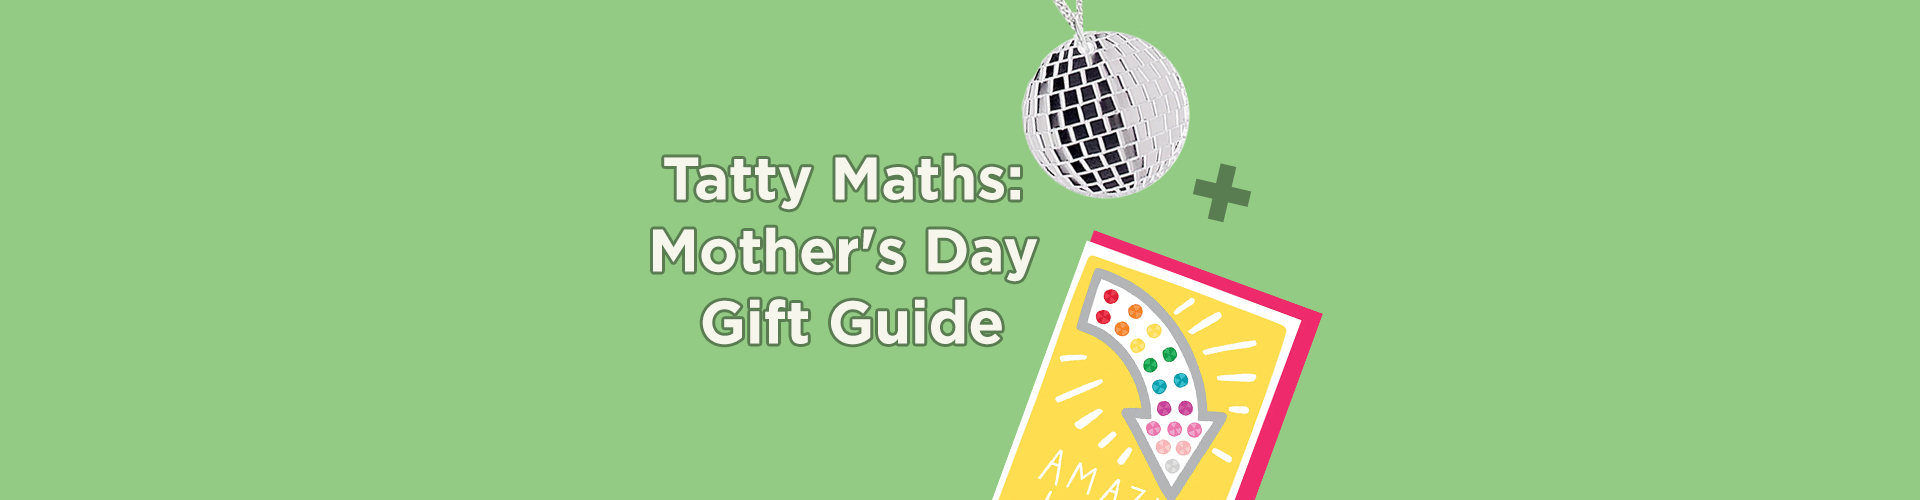 Tatty Maths: Mother's Day Gift Guide